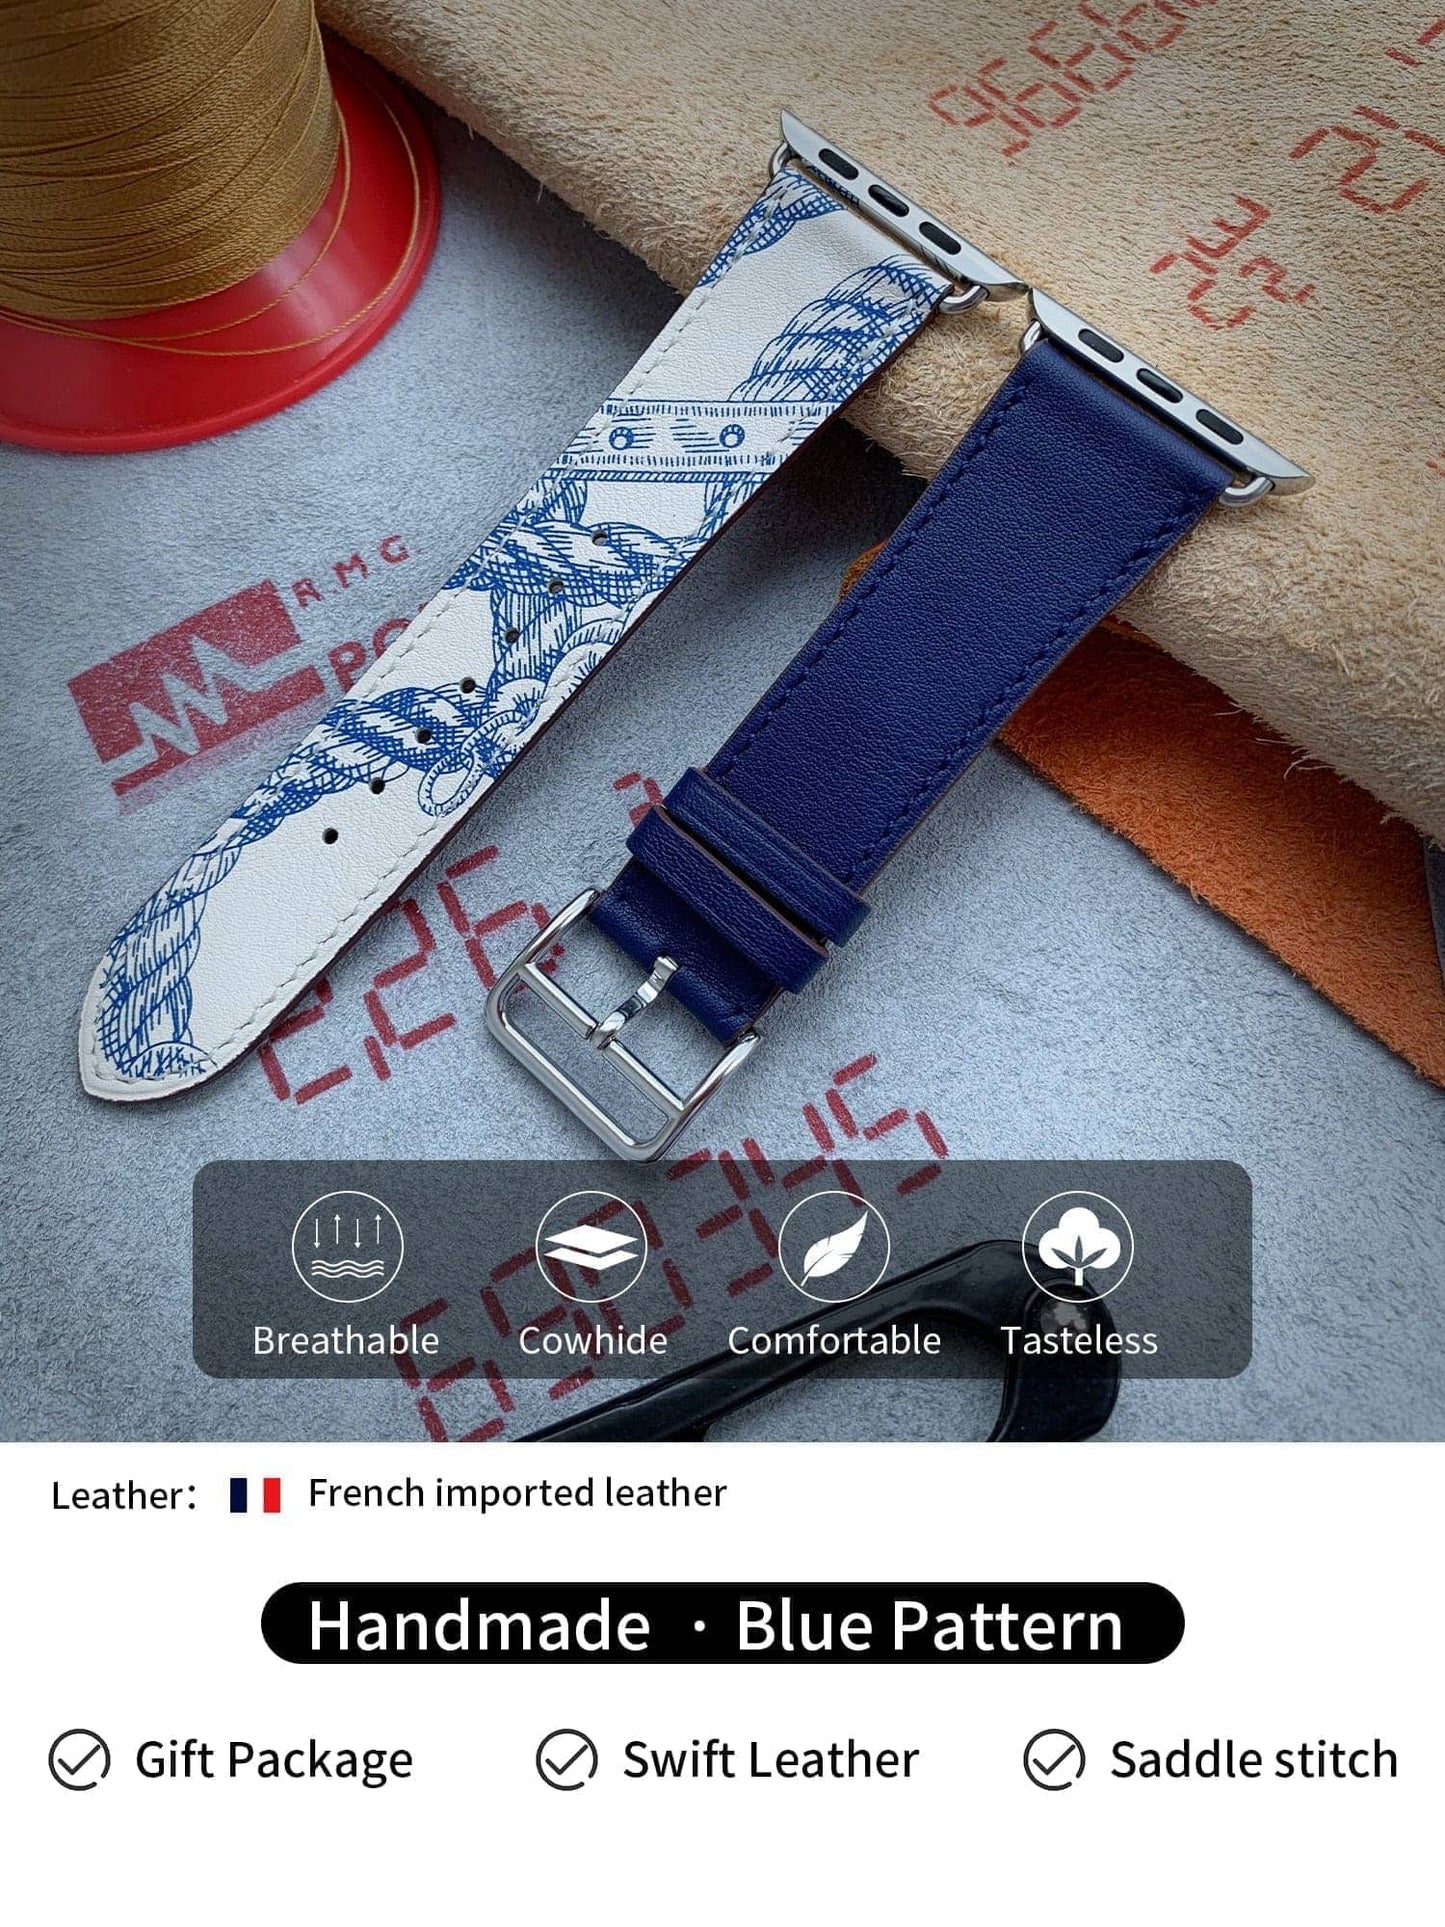 Hermes Watch Bands for Apple Watches - Infinity Loops